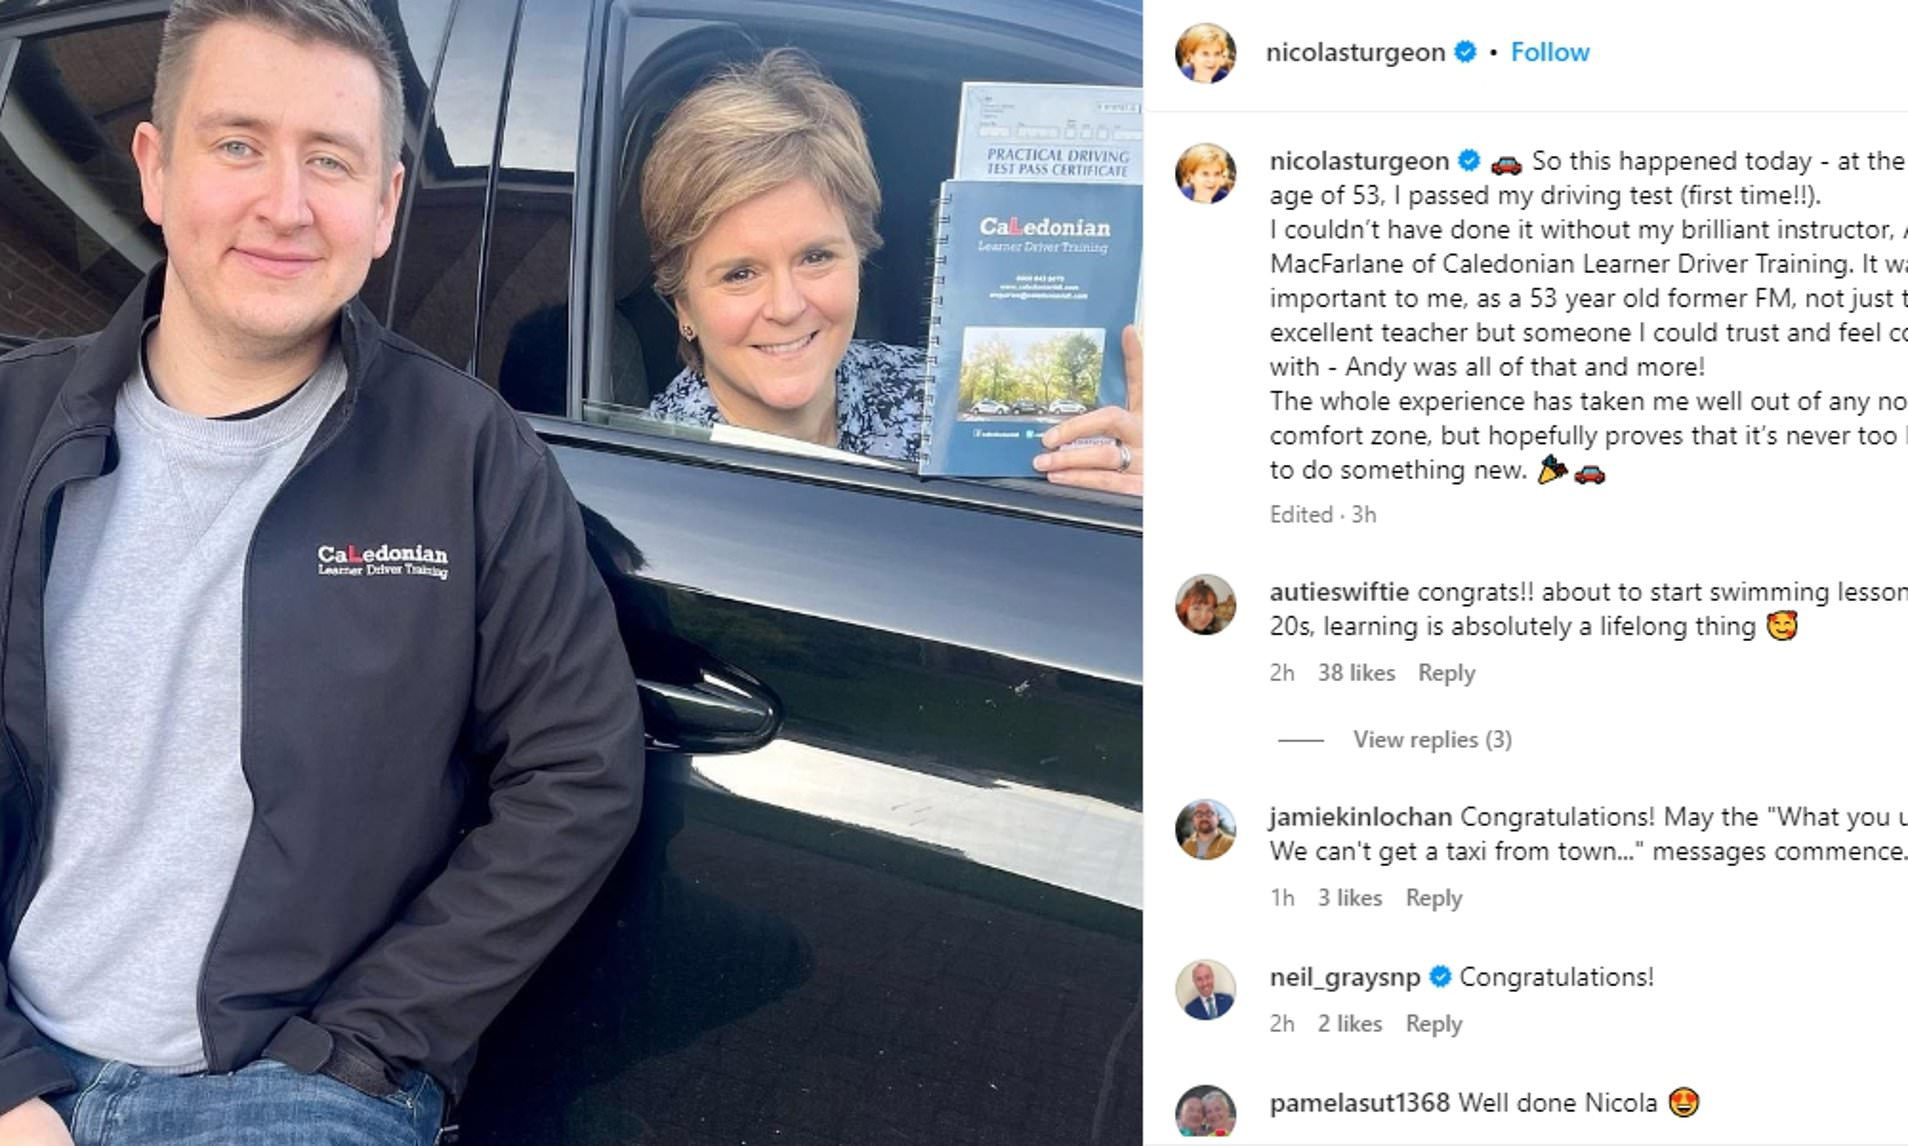 Nicola Sturgeon Passes Her Driving Test At The Age Of 53 After Ex Snp Leader Claimed Getting 